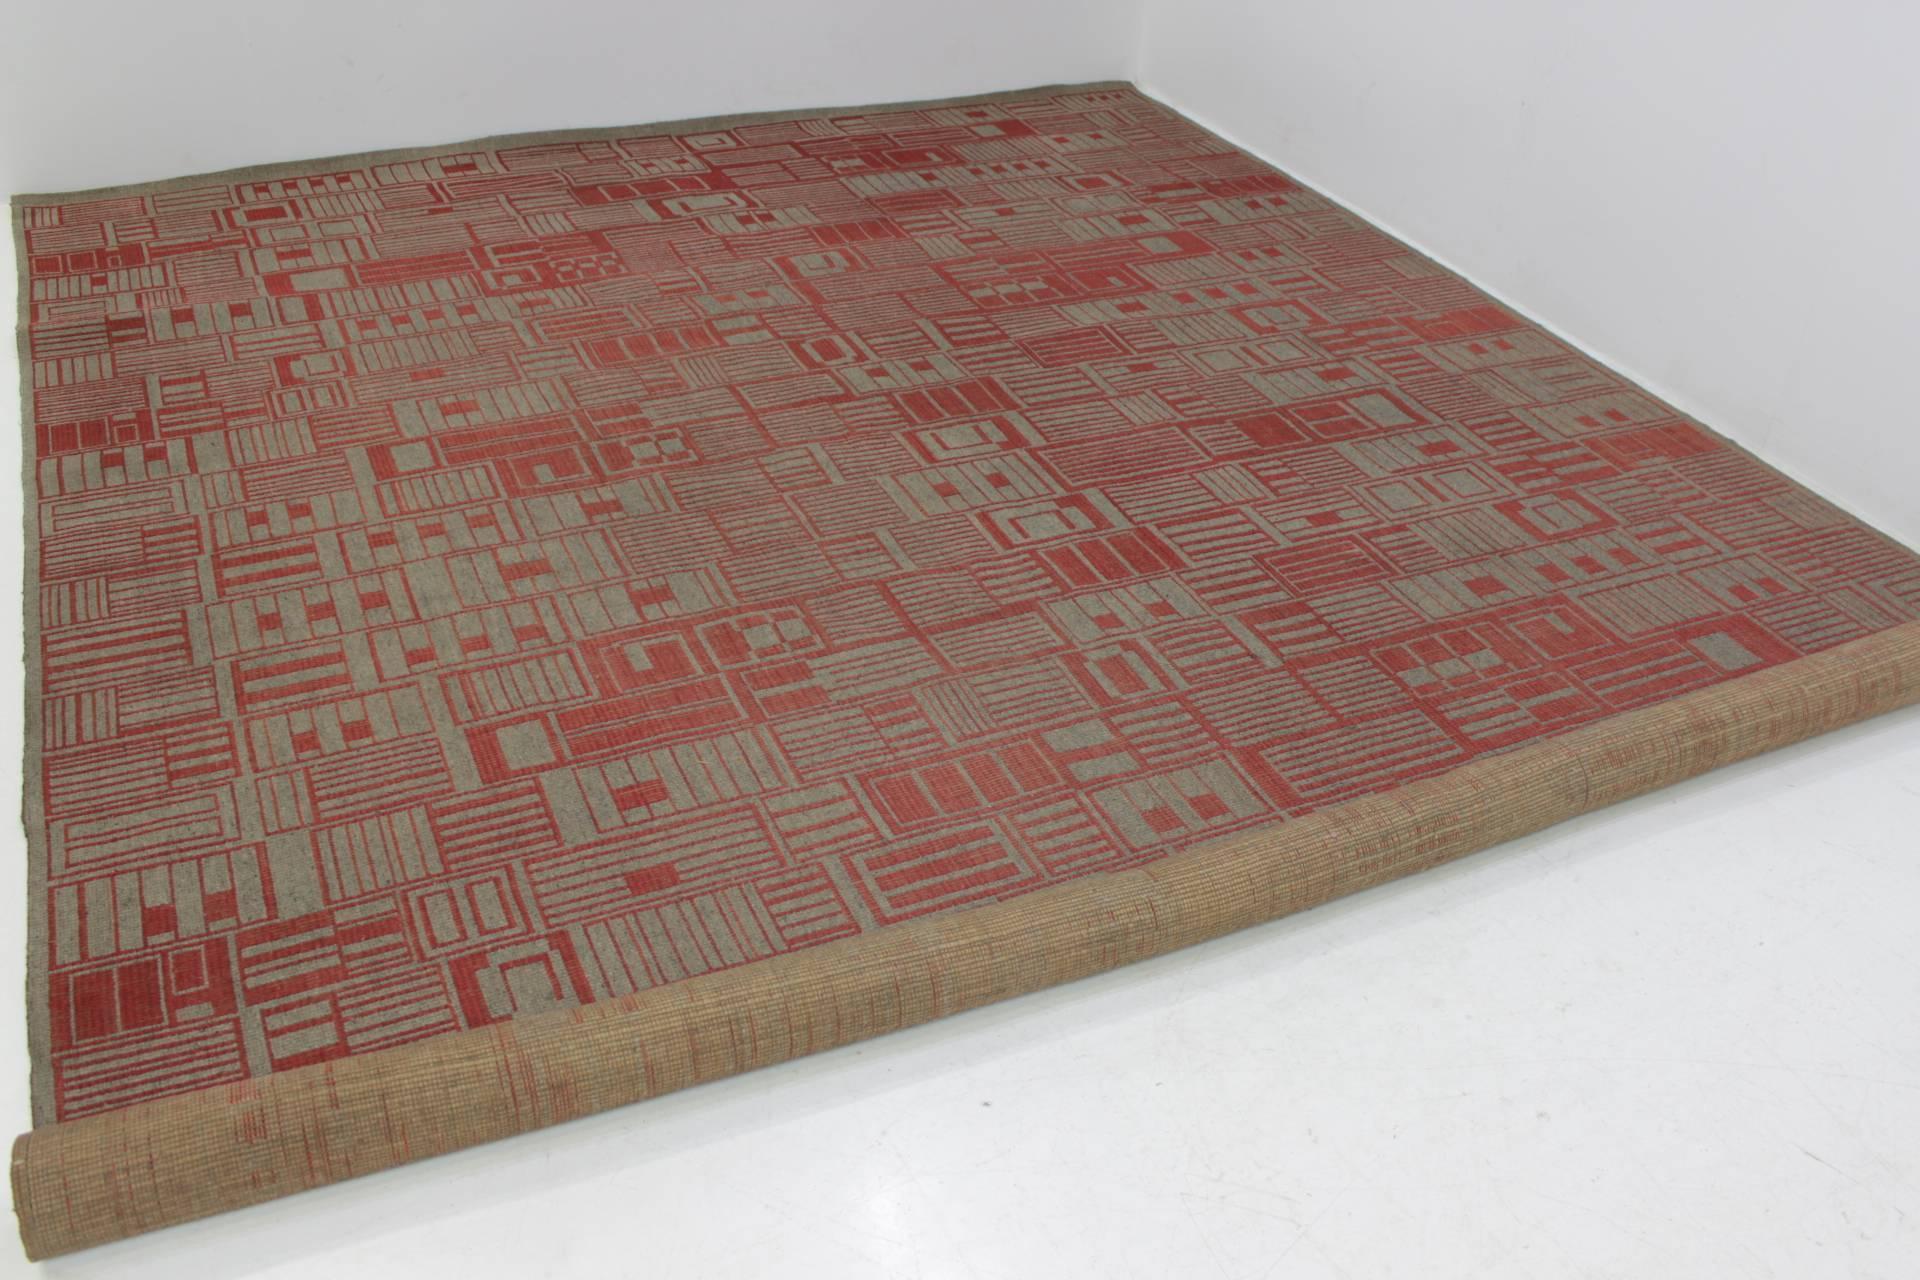 - 40th - 50th's, Czechoslovakia
- original condition, very interesting, red and grey geometric pattern
- Bouclé
- paperlabel
